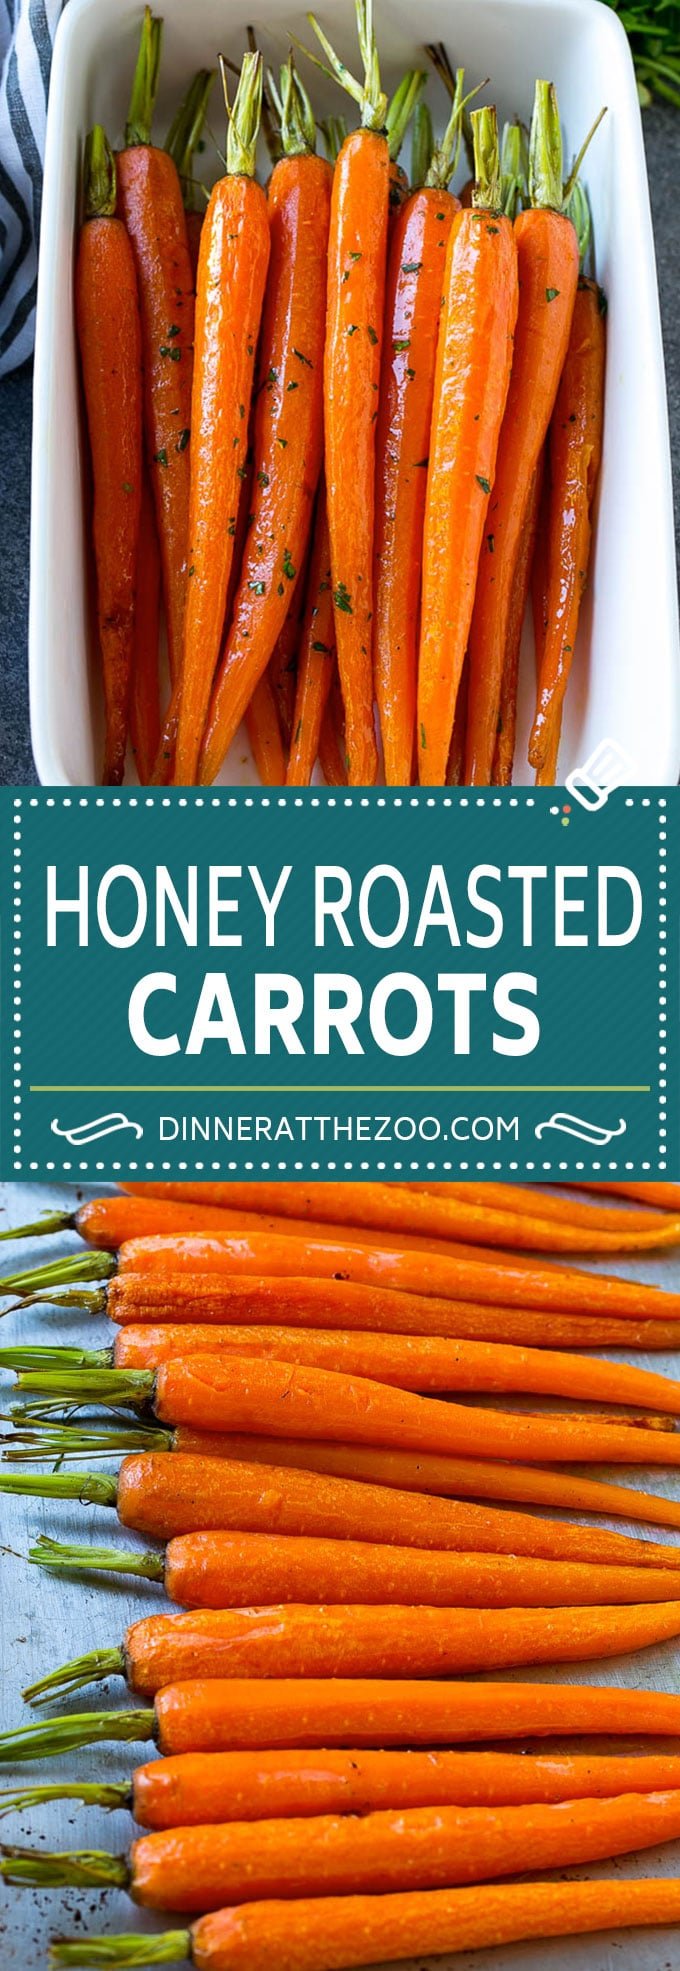 This recipe for honey roasted carrots is whole carrots, bathed in honey and seasonings, then roasted over high heat until tender and caramelized.